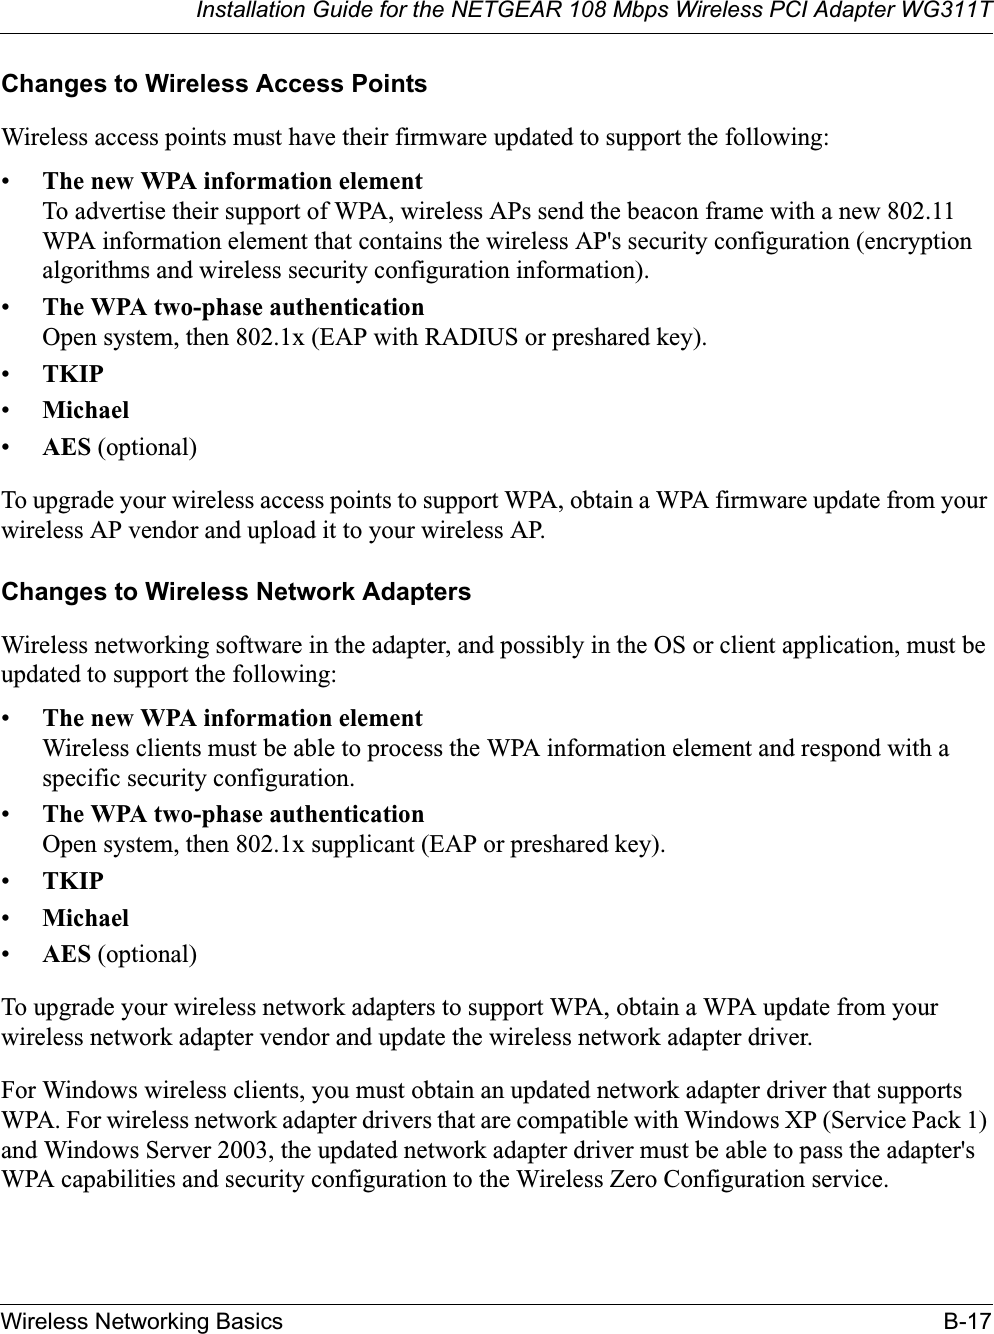 Installation Guide for the NETGEAR 108 Mbps Wireless PCI Adapter WG311TWireless Networking Basics B-17Changes to Wireless Access PointsWireless access points must have their firmware updated to support the following: •The new WPA information elementTo advertise their support of WPA, wireless APs send the beacon frame with a new 802.11 WPA information element that contains the wireless AP&apos;s security configuration (encryption algorithms and wireless security configuration information). •The WPA two-phase authenticationOpen system, then 802.1x (EAP with RADIUS or preshared key). •TKIP•Michael•AES (optional)To upgrade your wireless access points to support WPA, obtain a WPA firmware update from your wireless AP vendor and upload it to your wireless AP.Changes to Wireless Network AdaptersWireless networking software in the adapter, and possibly in the OS or client application, must be updated to support the following: •The new WPA information elementWireless clients must be able to process the WPA information element and respond with a specific security configuration. •The WPA two-phase authenticationOpen system, then 802.1x supplicant (EAP or preshared key). •TKIP•Michael•AES (optional)To upgrade your wireless network adapters to support WPA, obtain a WPA update from your wireless network adapter vendor and update the wireless network adapter driver.For Windows wireless clients, you must obtain an updated network adapter driver that supports WPA. For wireless network adapter drivers that are compatible with Windows XP (Service Pack 1) and Windows Server 2003, the updated network adapter driver must be able to pass the adapter&apos;s WPA capabilities and security configuration to the Wireless Zero Configuration service. 